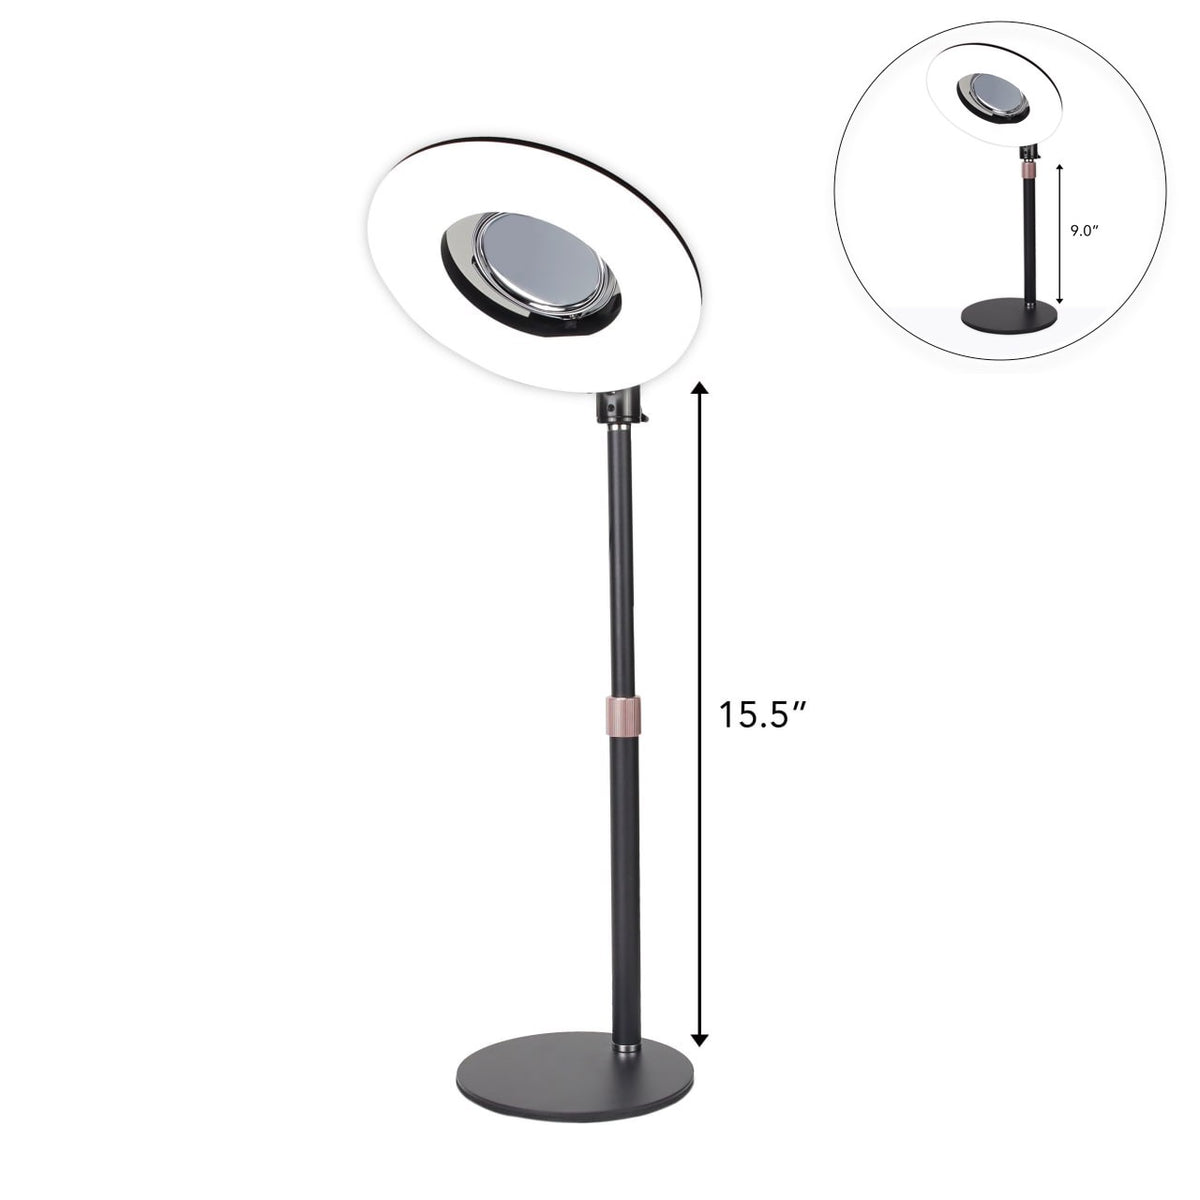 14 Inches LED Ring Light - Zuba Online Mall